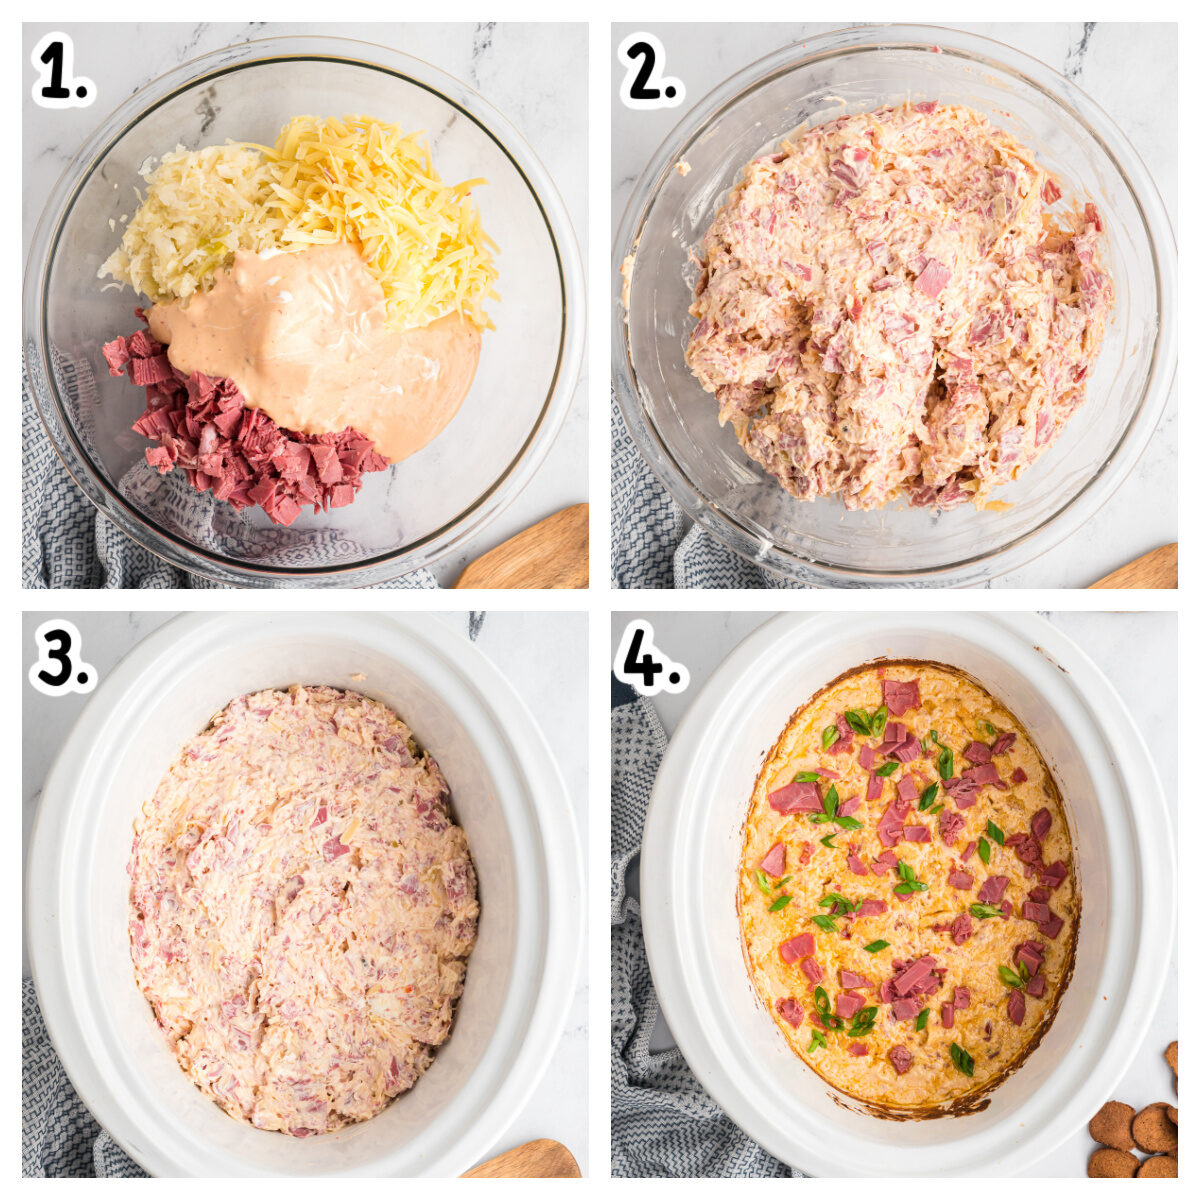 4 images showing how to make reuben dip in a slow cooker.